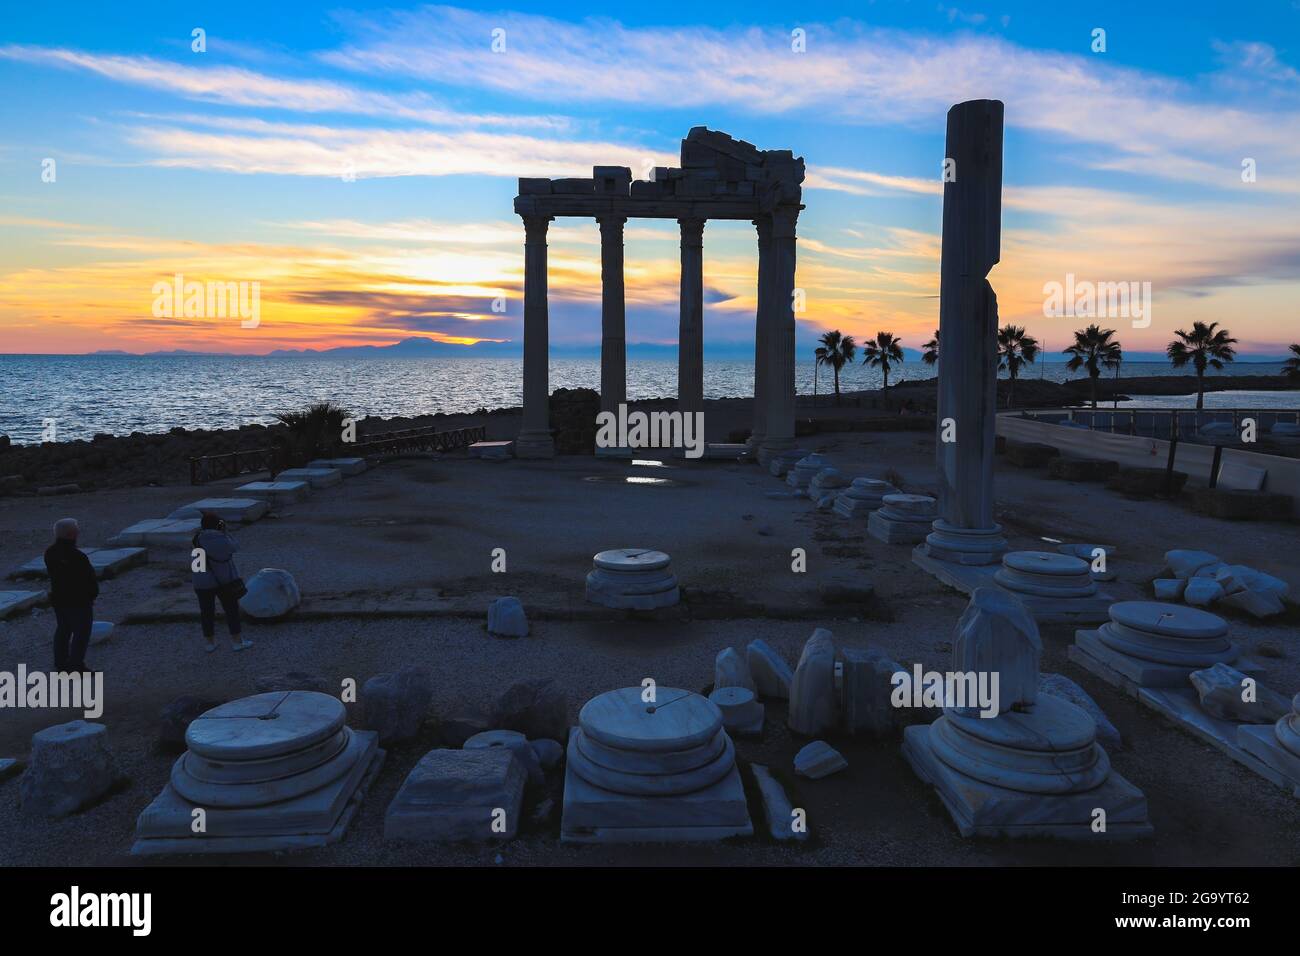 The Temple of Apollo Silhouette in the ancient Carian town of Side at sunset, in southern Turkey on the Mediterranean Sea coast, Greek and Roman. Stock Photo